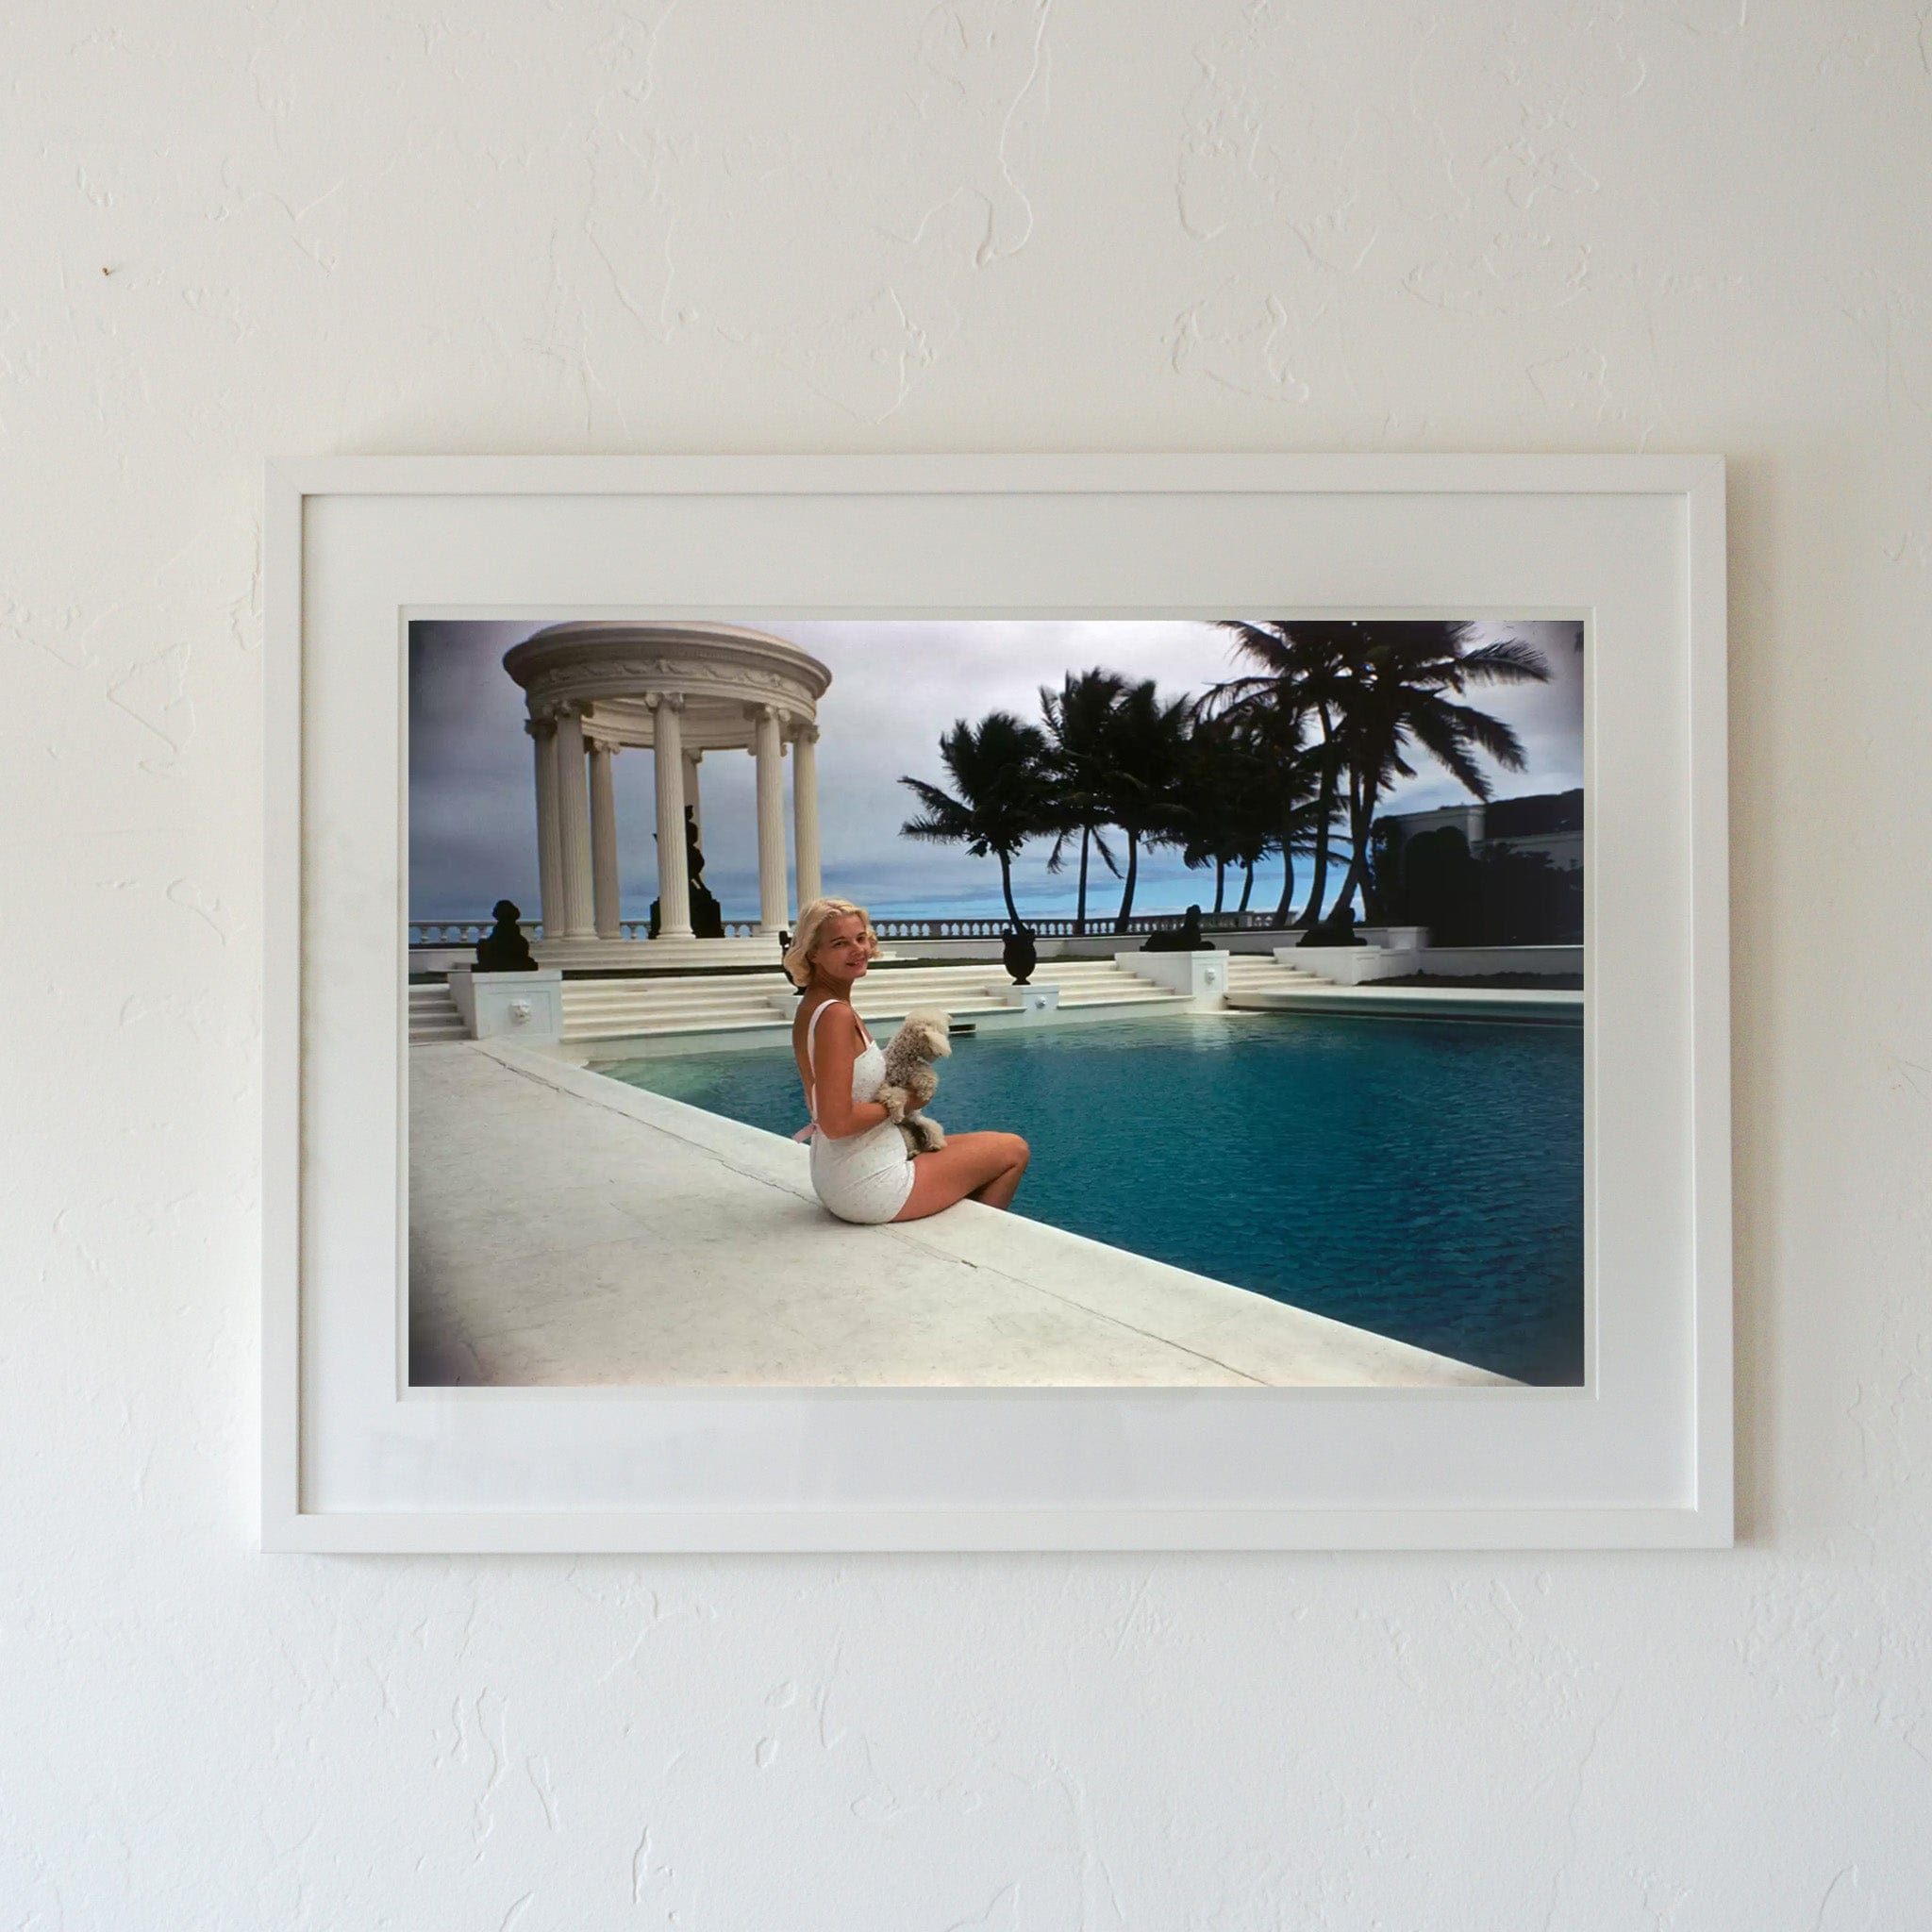 +COOP Artwork Slim Aarons Framed Photograph  - "CZ by the Pool" Getty Images Hulton Archive, illa Artemis, Palm Beach, Florida, 1955 by Slim Aarons